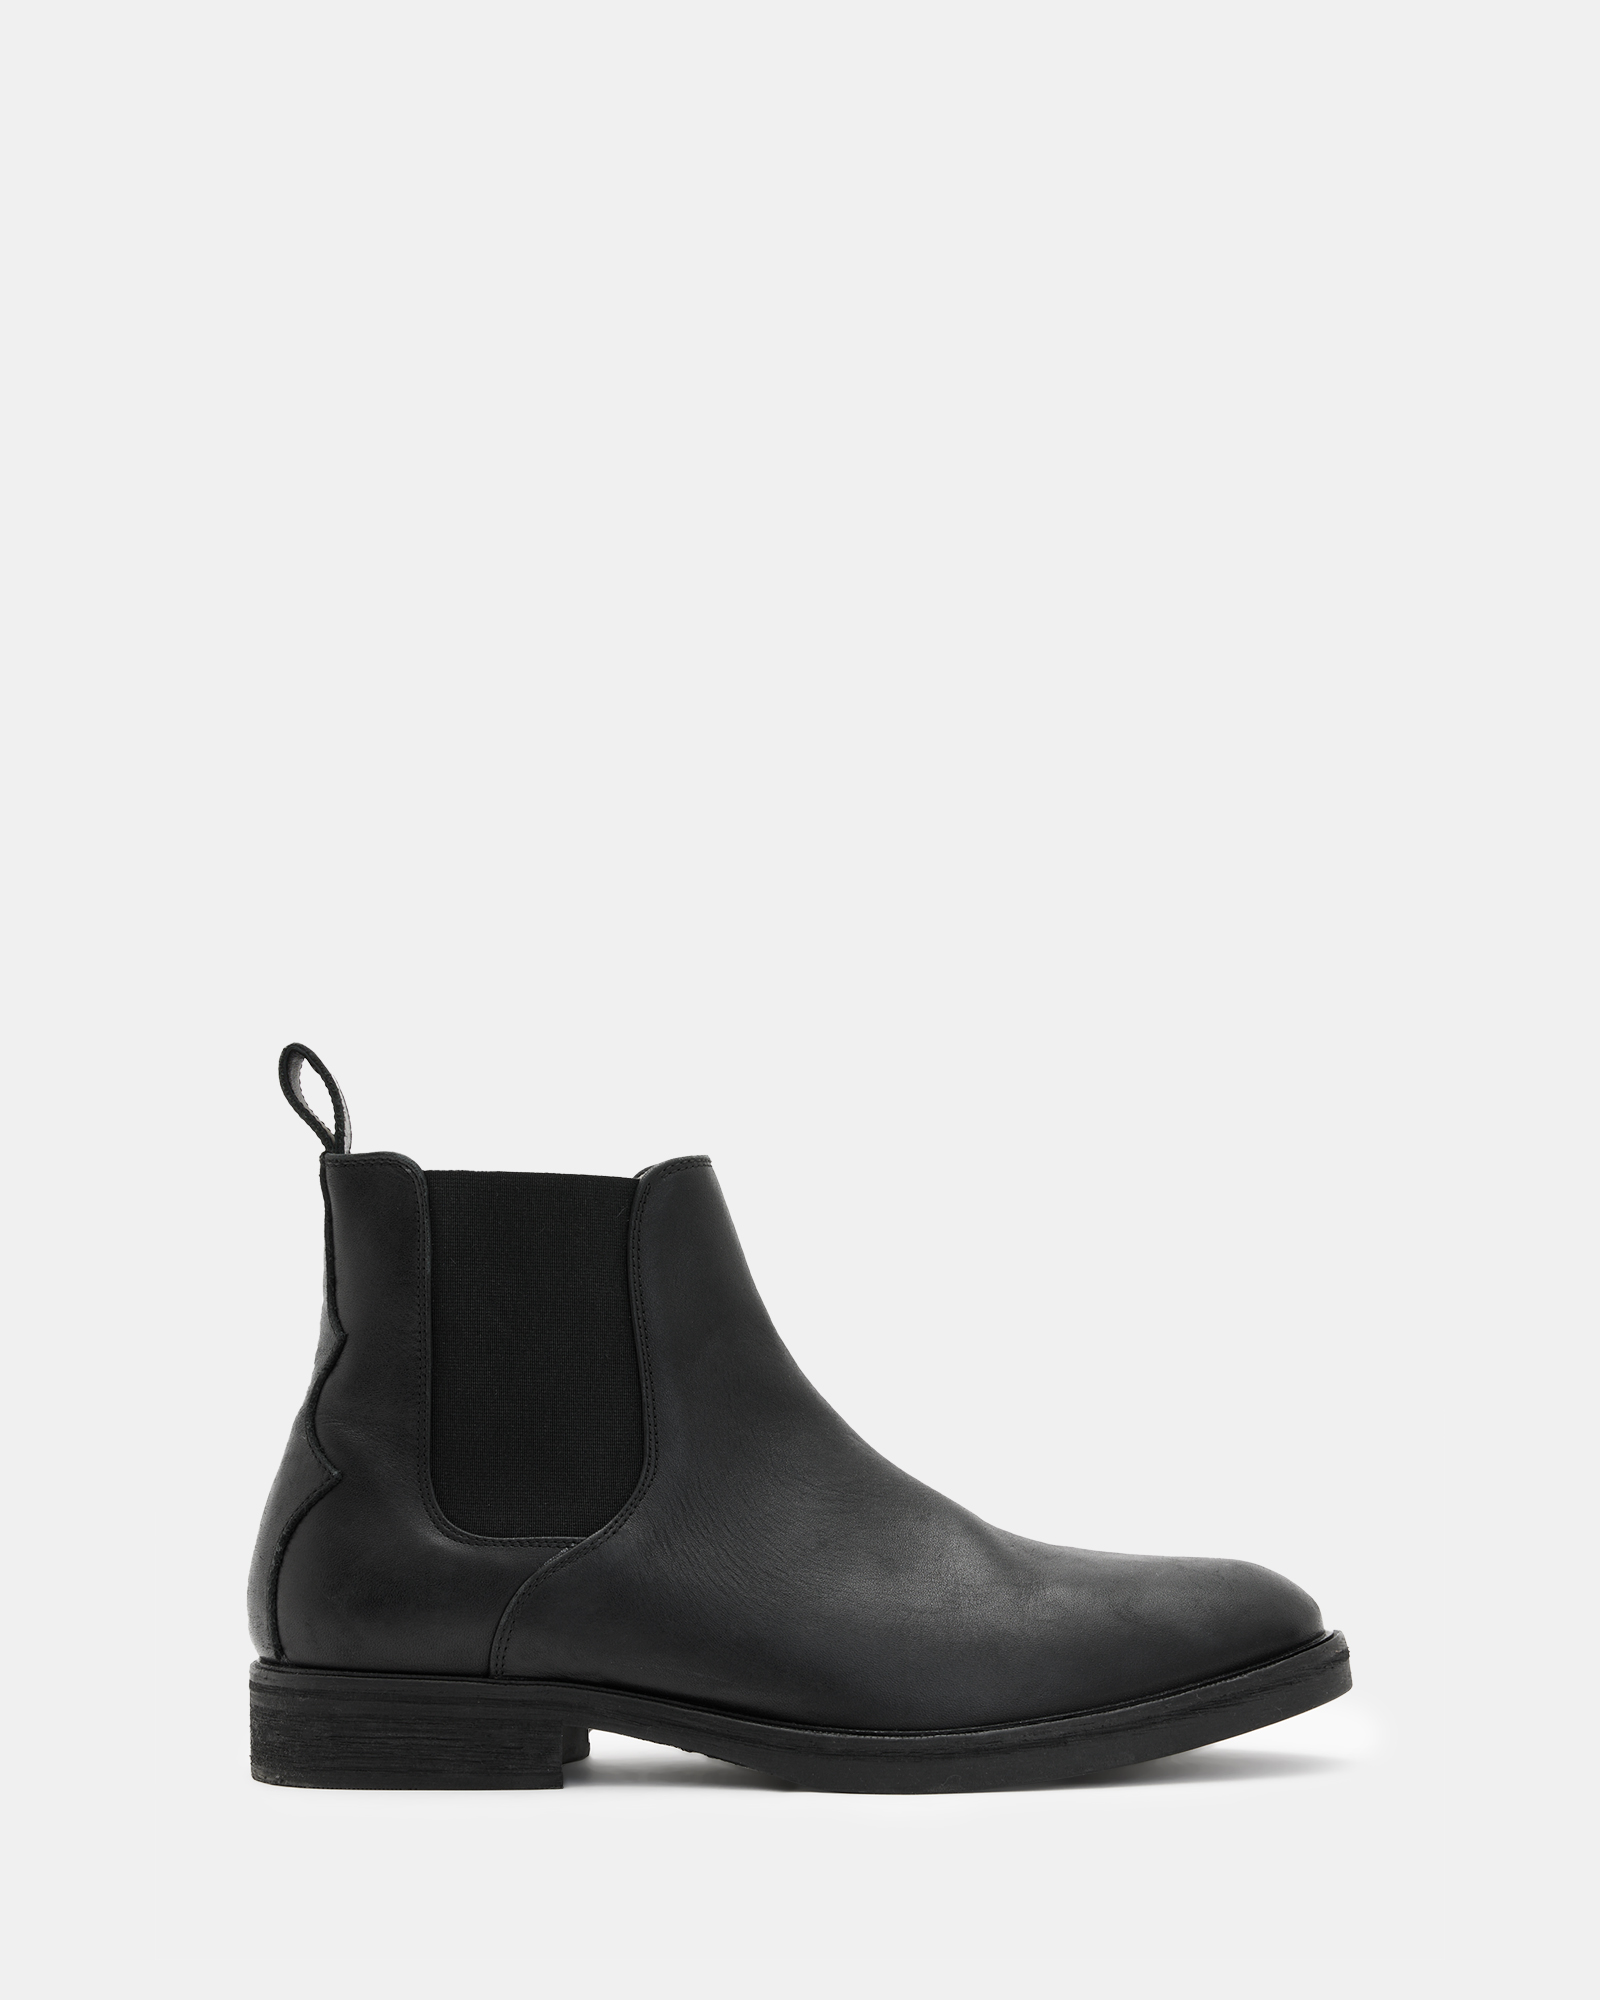 AllSaints Creed Leather Chelsea Boots,, Black